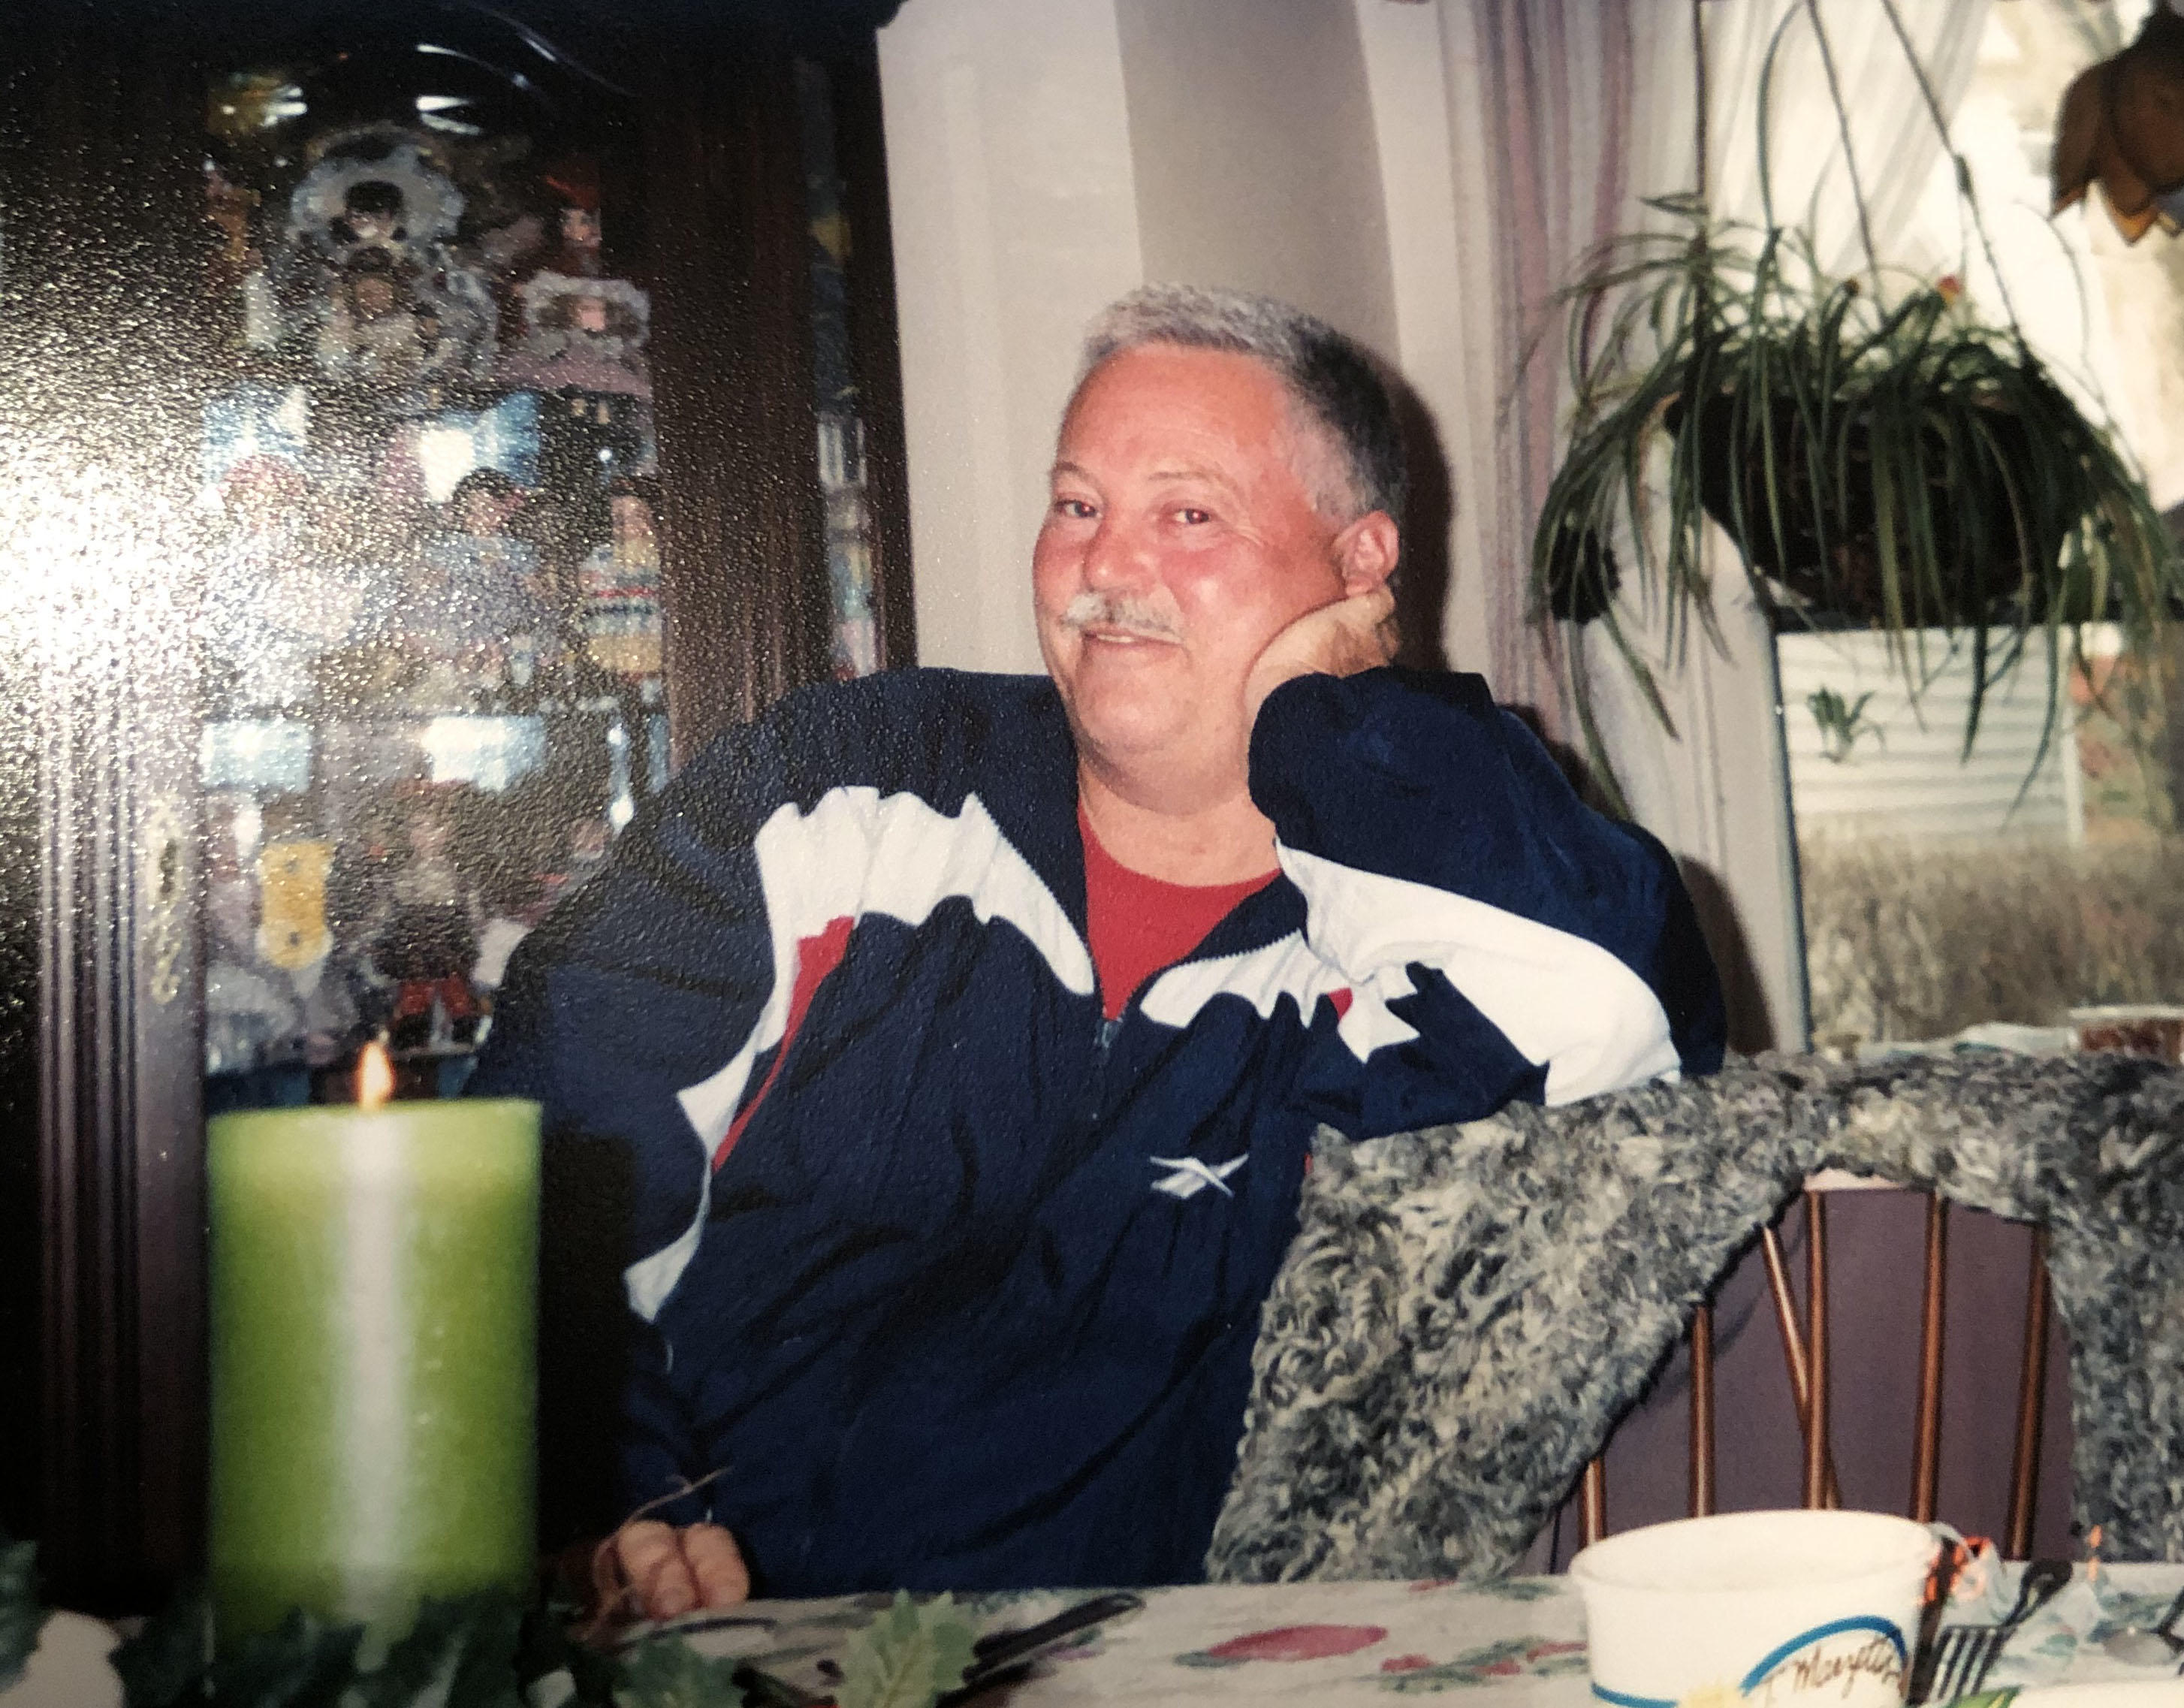 Larry Buchanan Obituary (2020) - Germantown, OH - Miami Valley Today